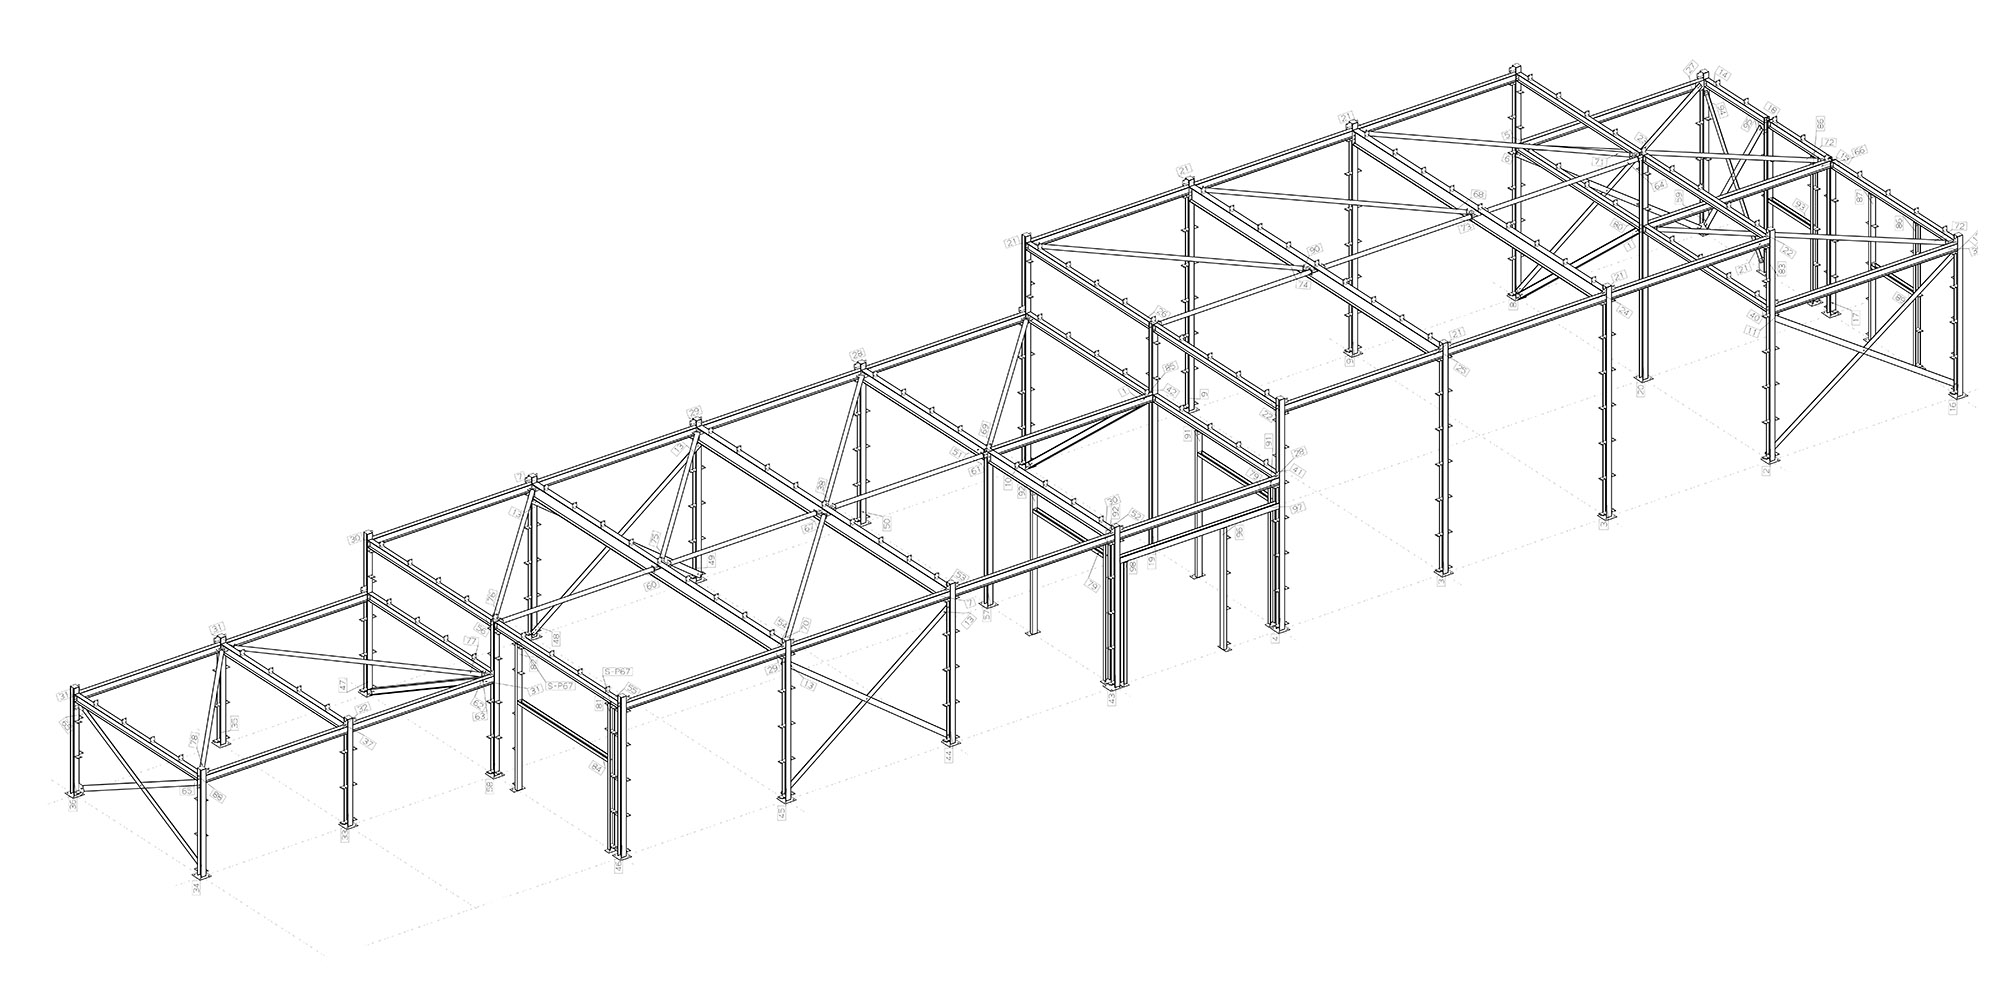 Specialists in Structural Steel Erecting across central Scotland